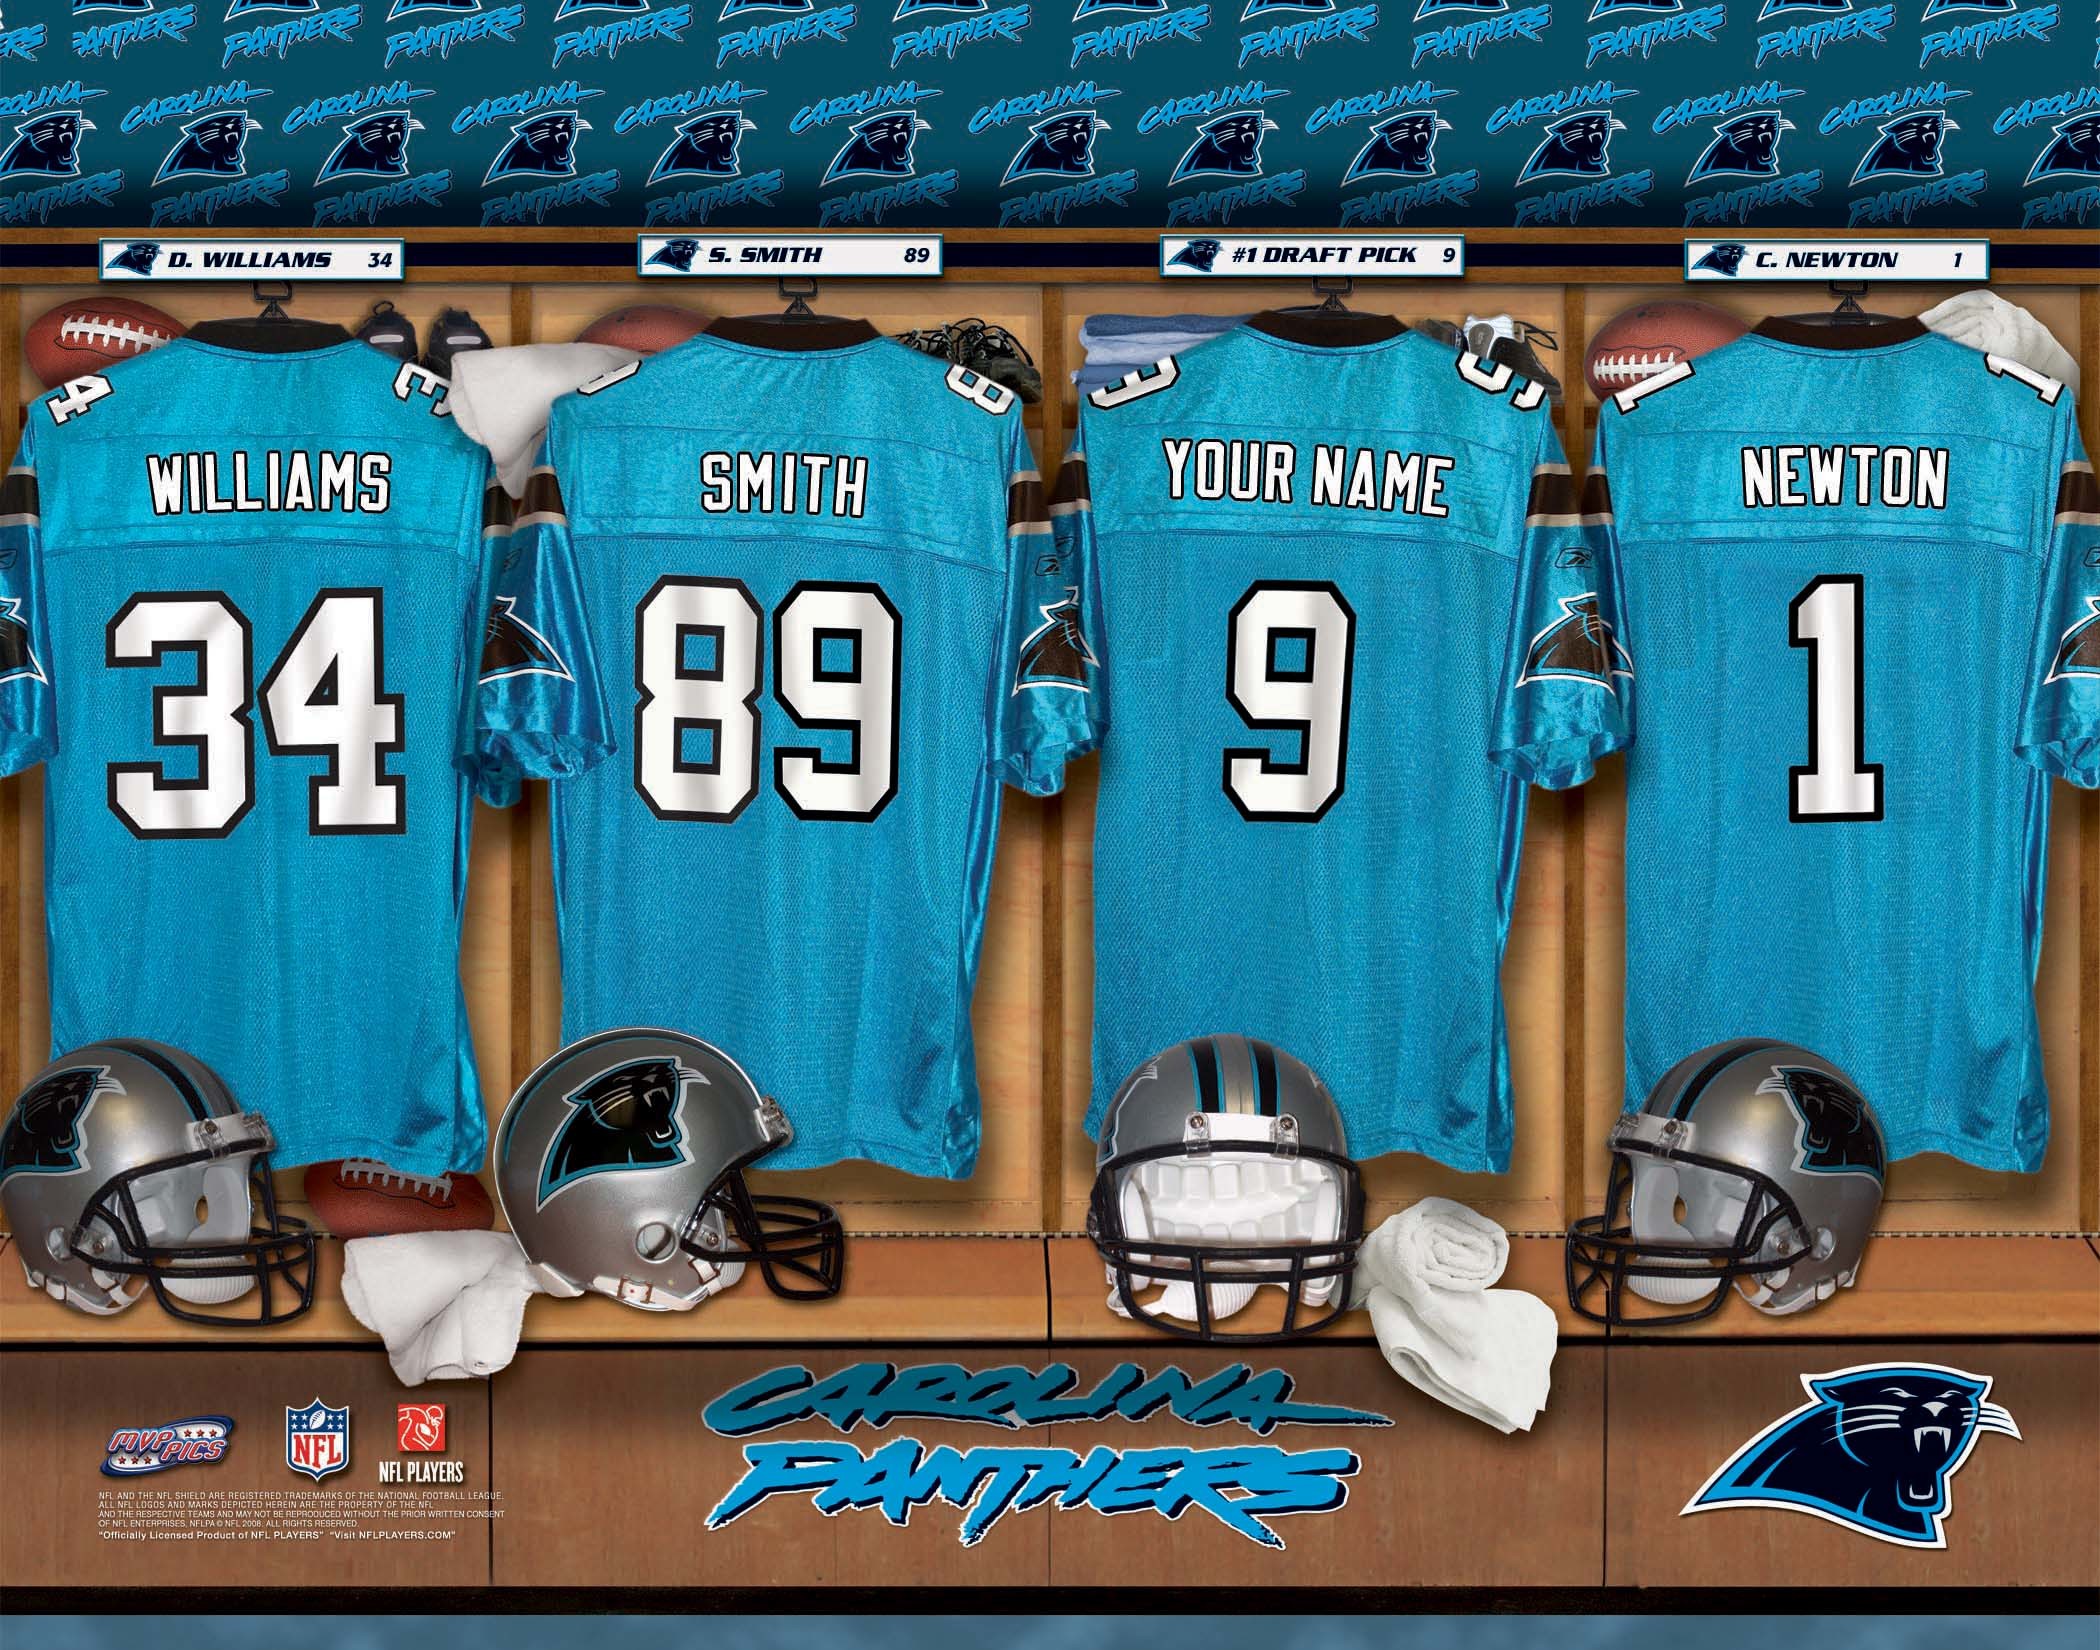 2100x1650  Carolina Panthers IPhone 5 Widescreen Image | Impressive Pictures  - HD Wallpapers